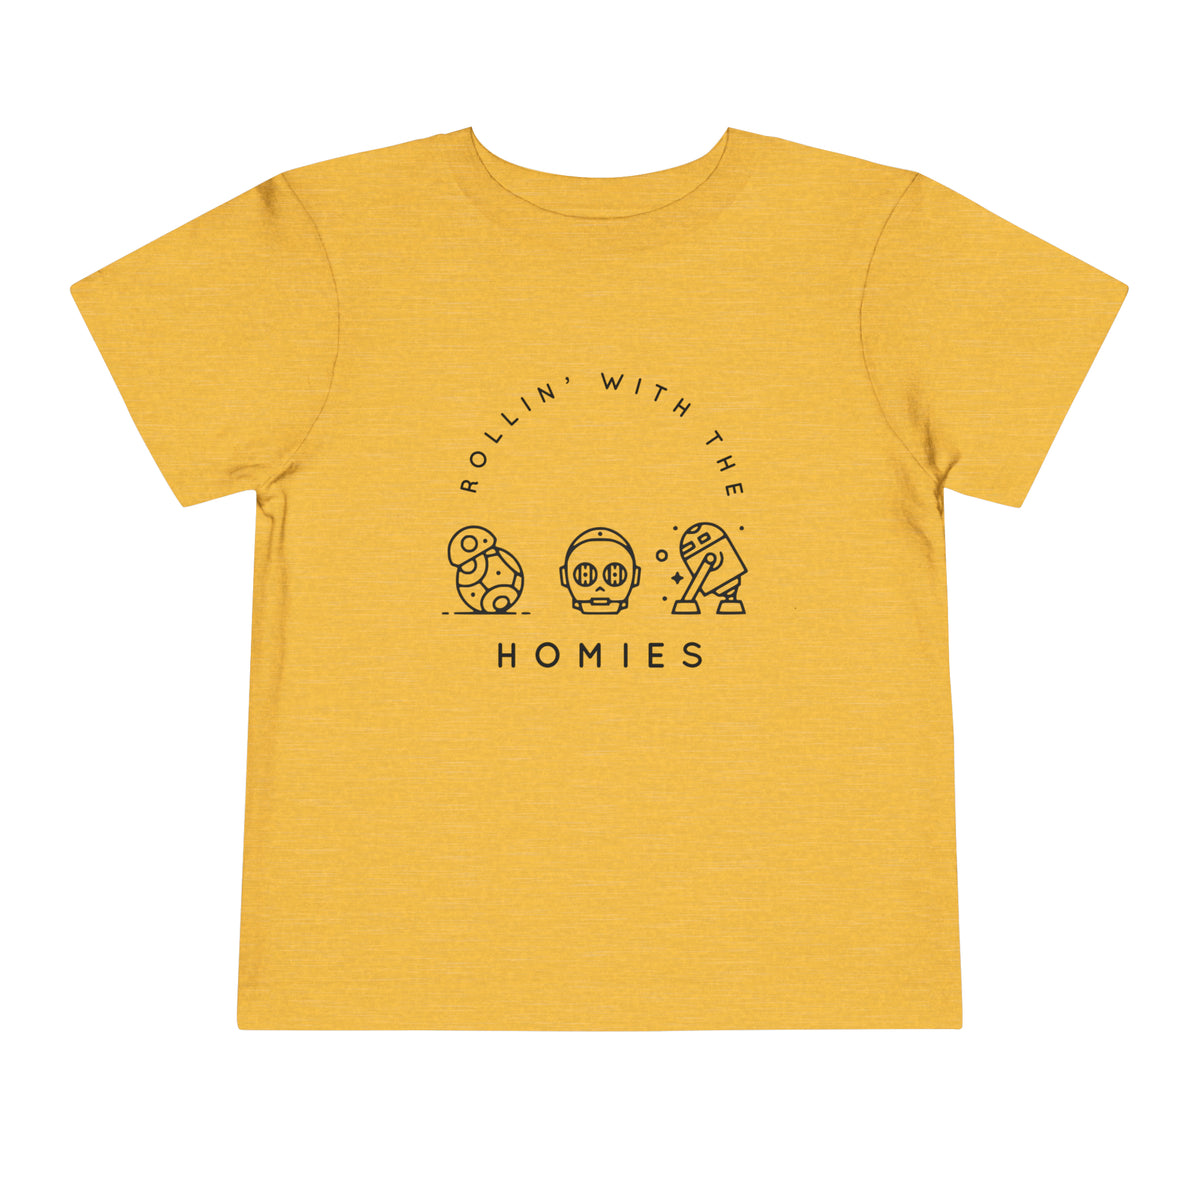 Rollin’ With The Homies Bella Canvas Toddler Short Sleeve Tee